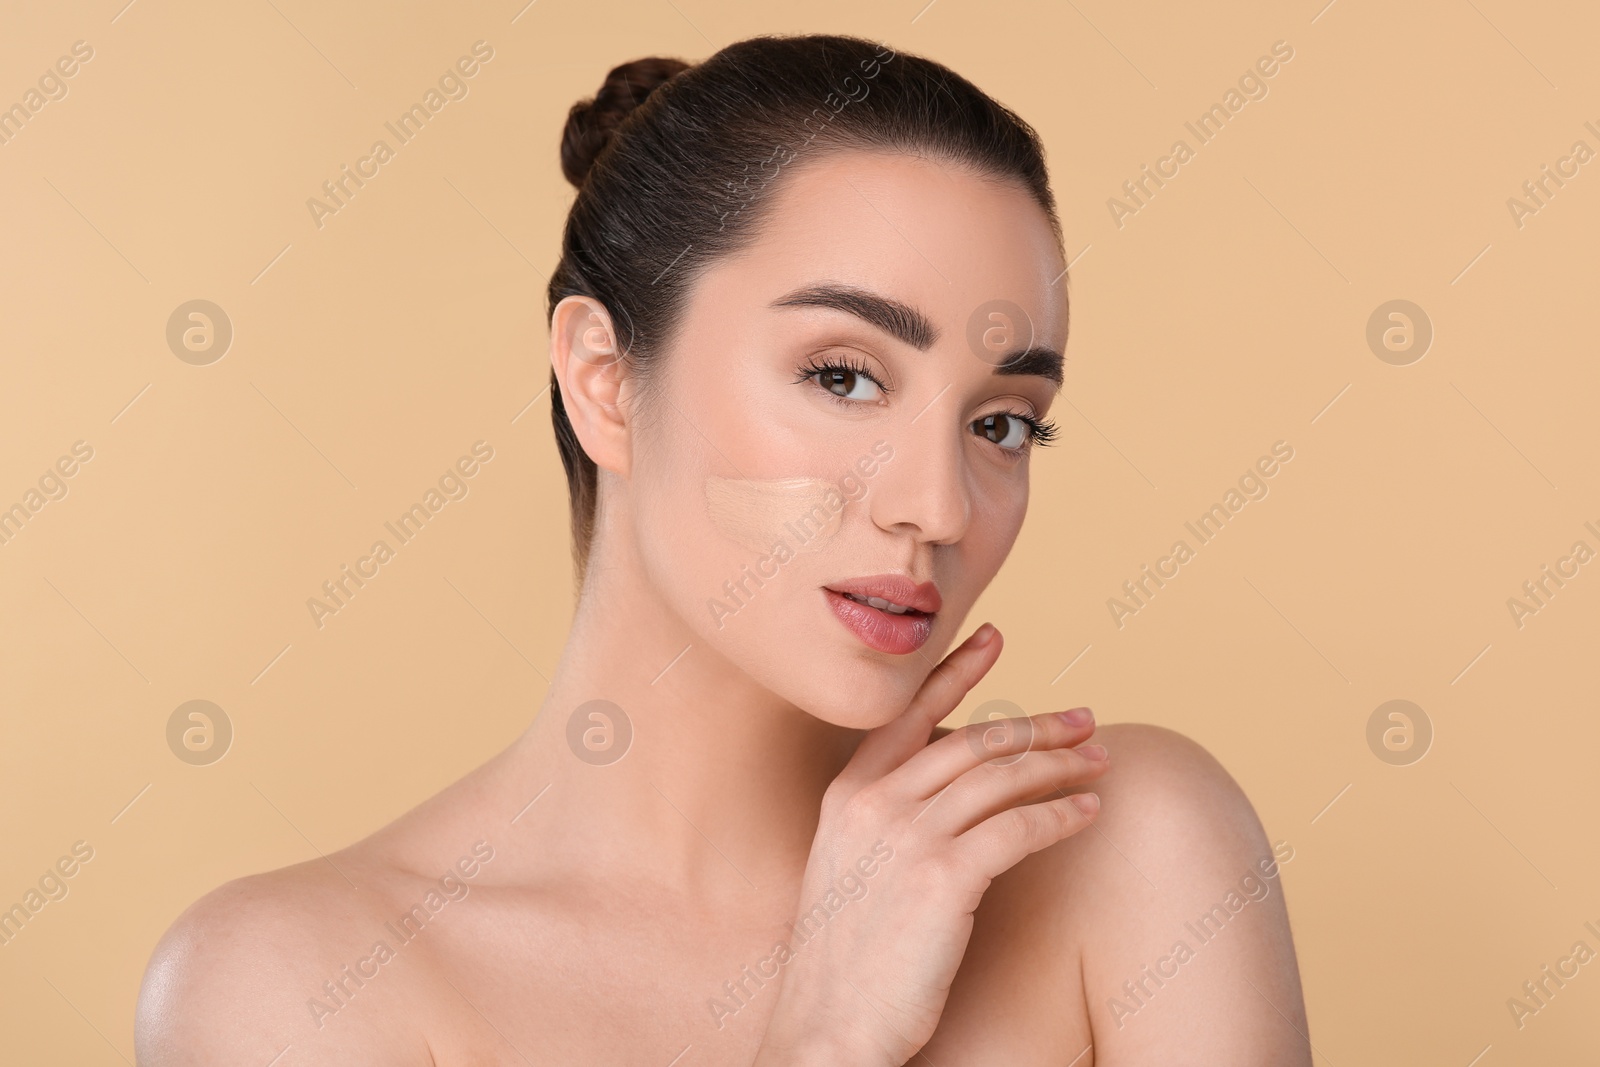 Photo of Woman with swatch of foundation on face against beige background